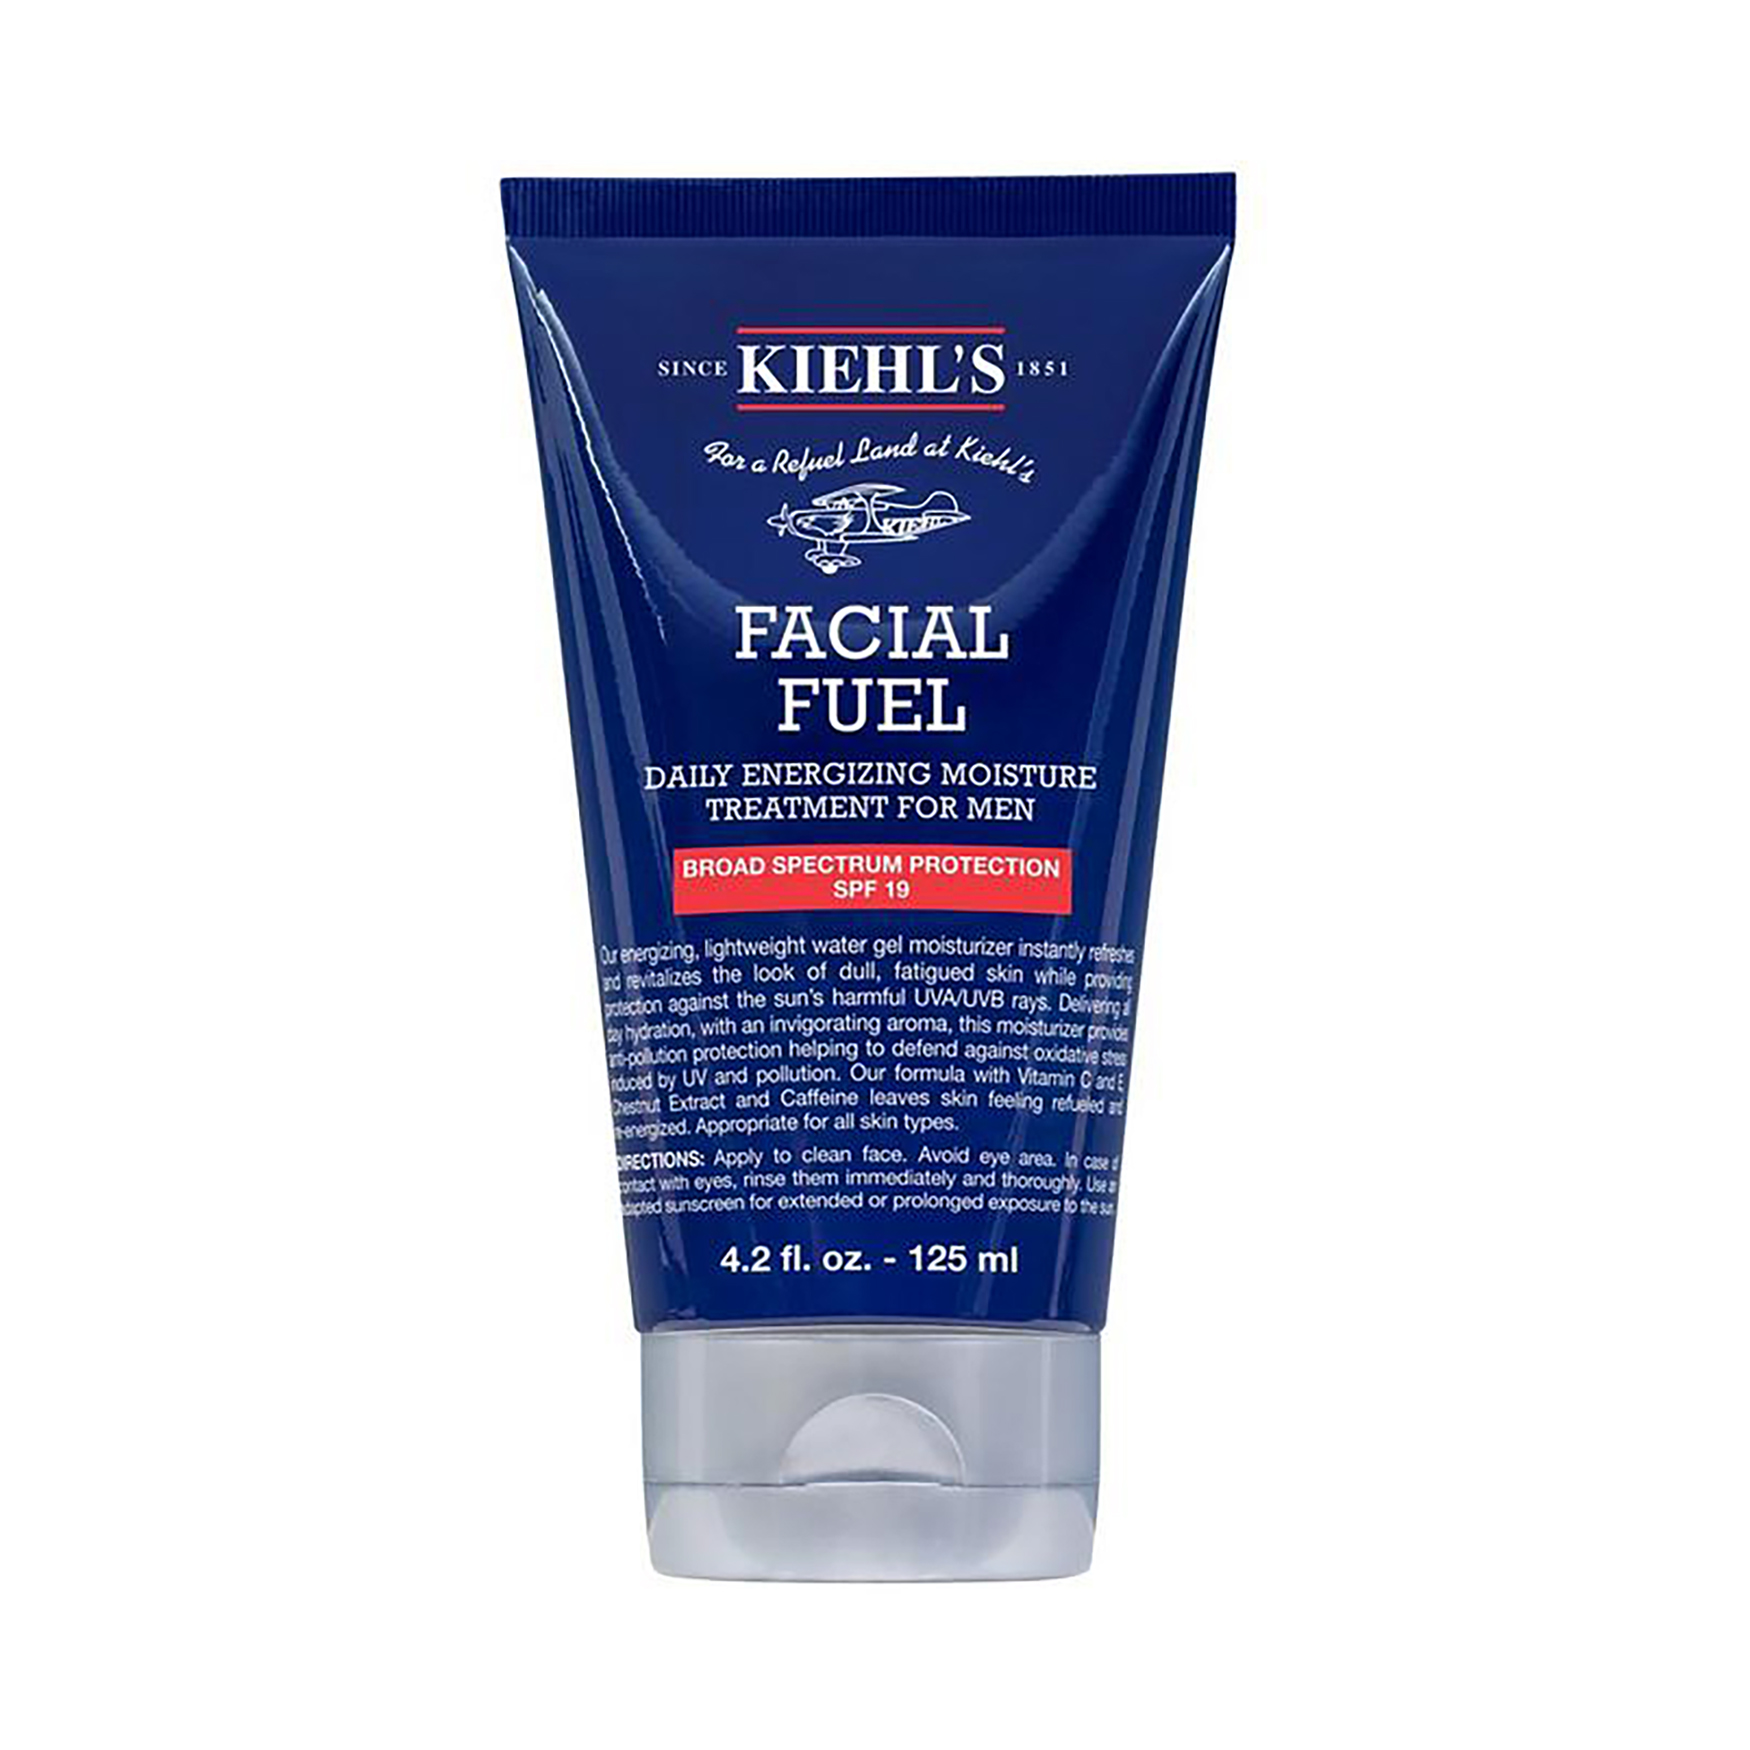 Facial Fuel Daily Energizing Moisture Treatment for Men SPF 19 | Space NK